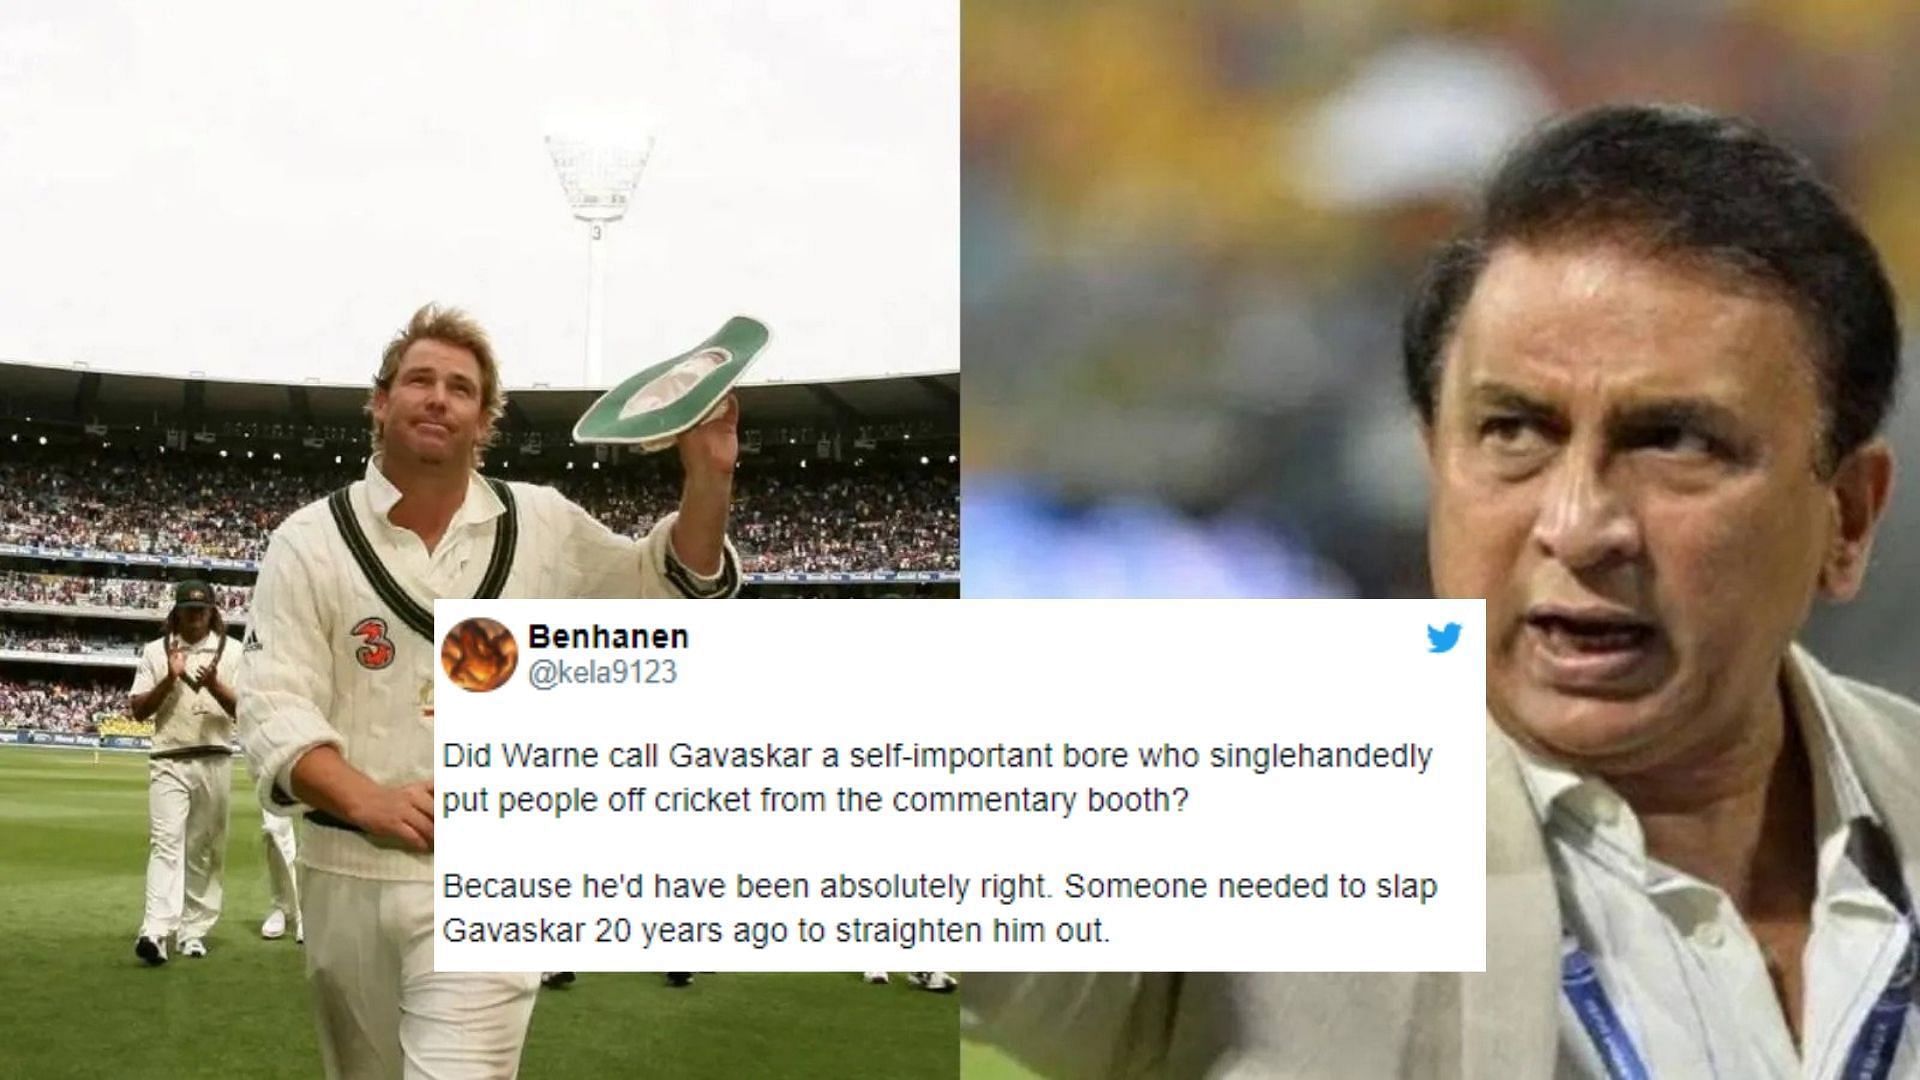 Gavaskar made controversial comments about the late Shane Warne